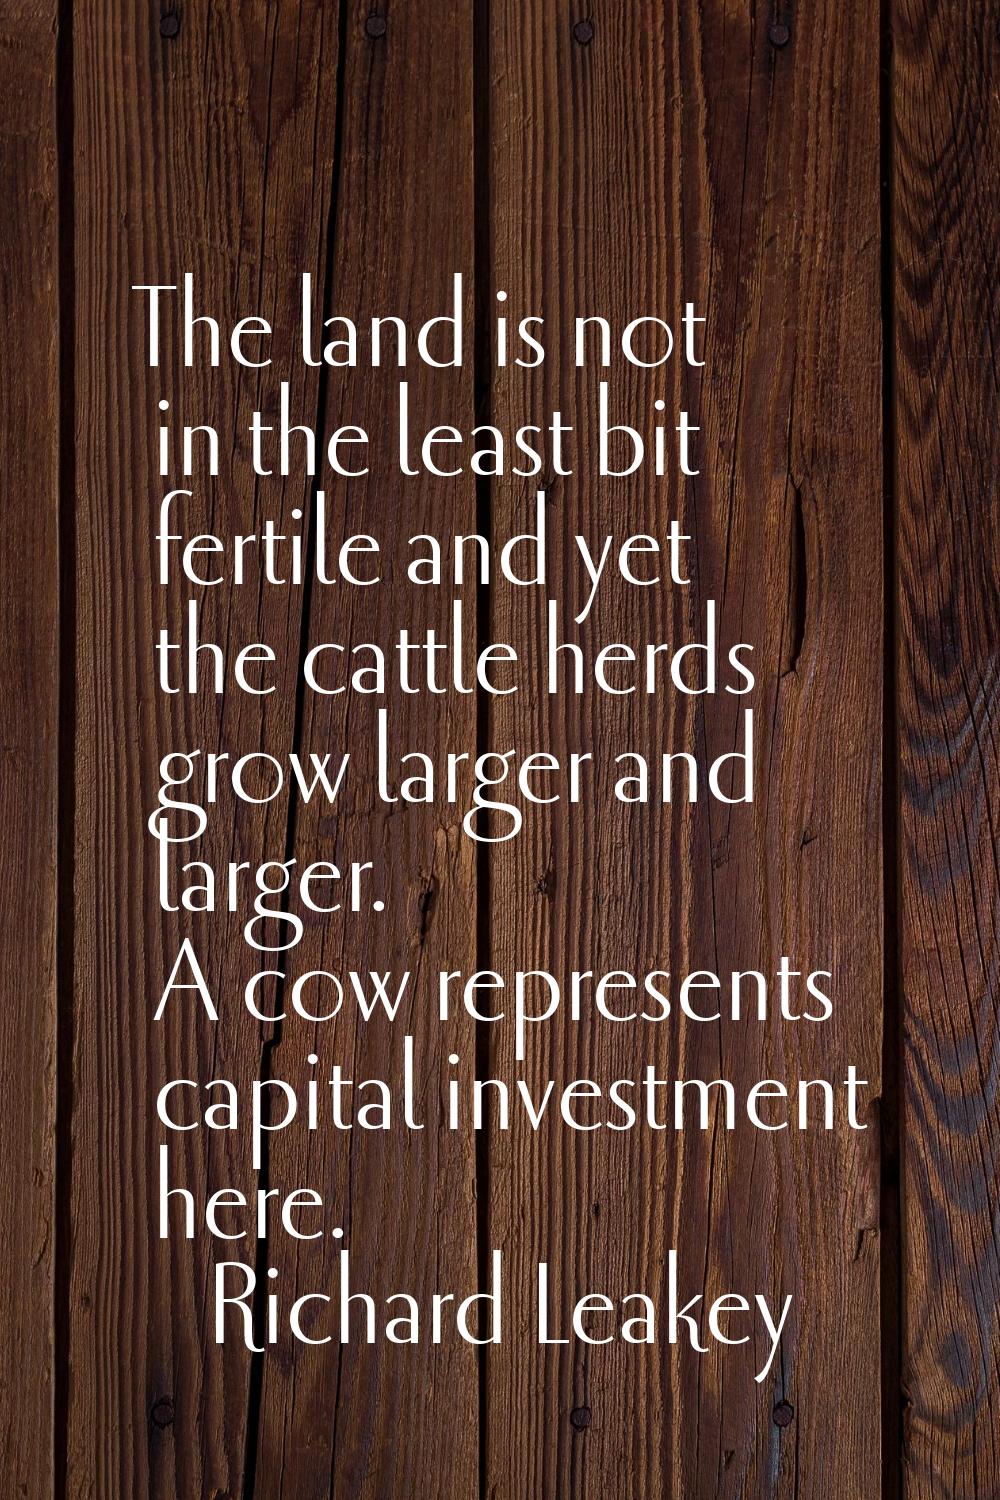 The land is not in the least bit fertile and yet the cattle herds grow larger and larger. A cow rep